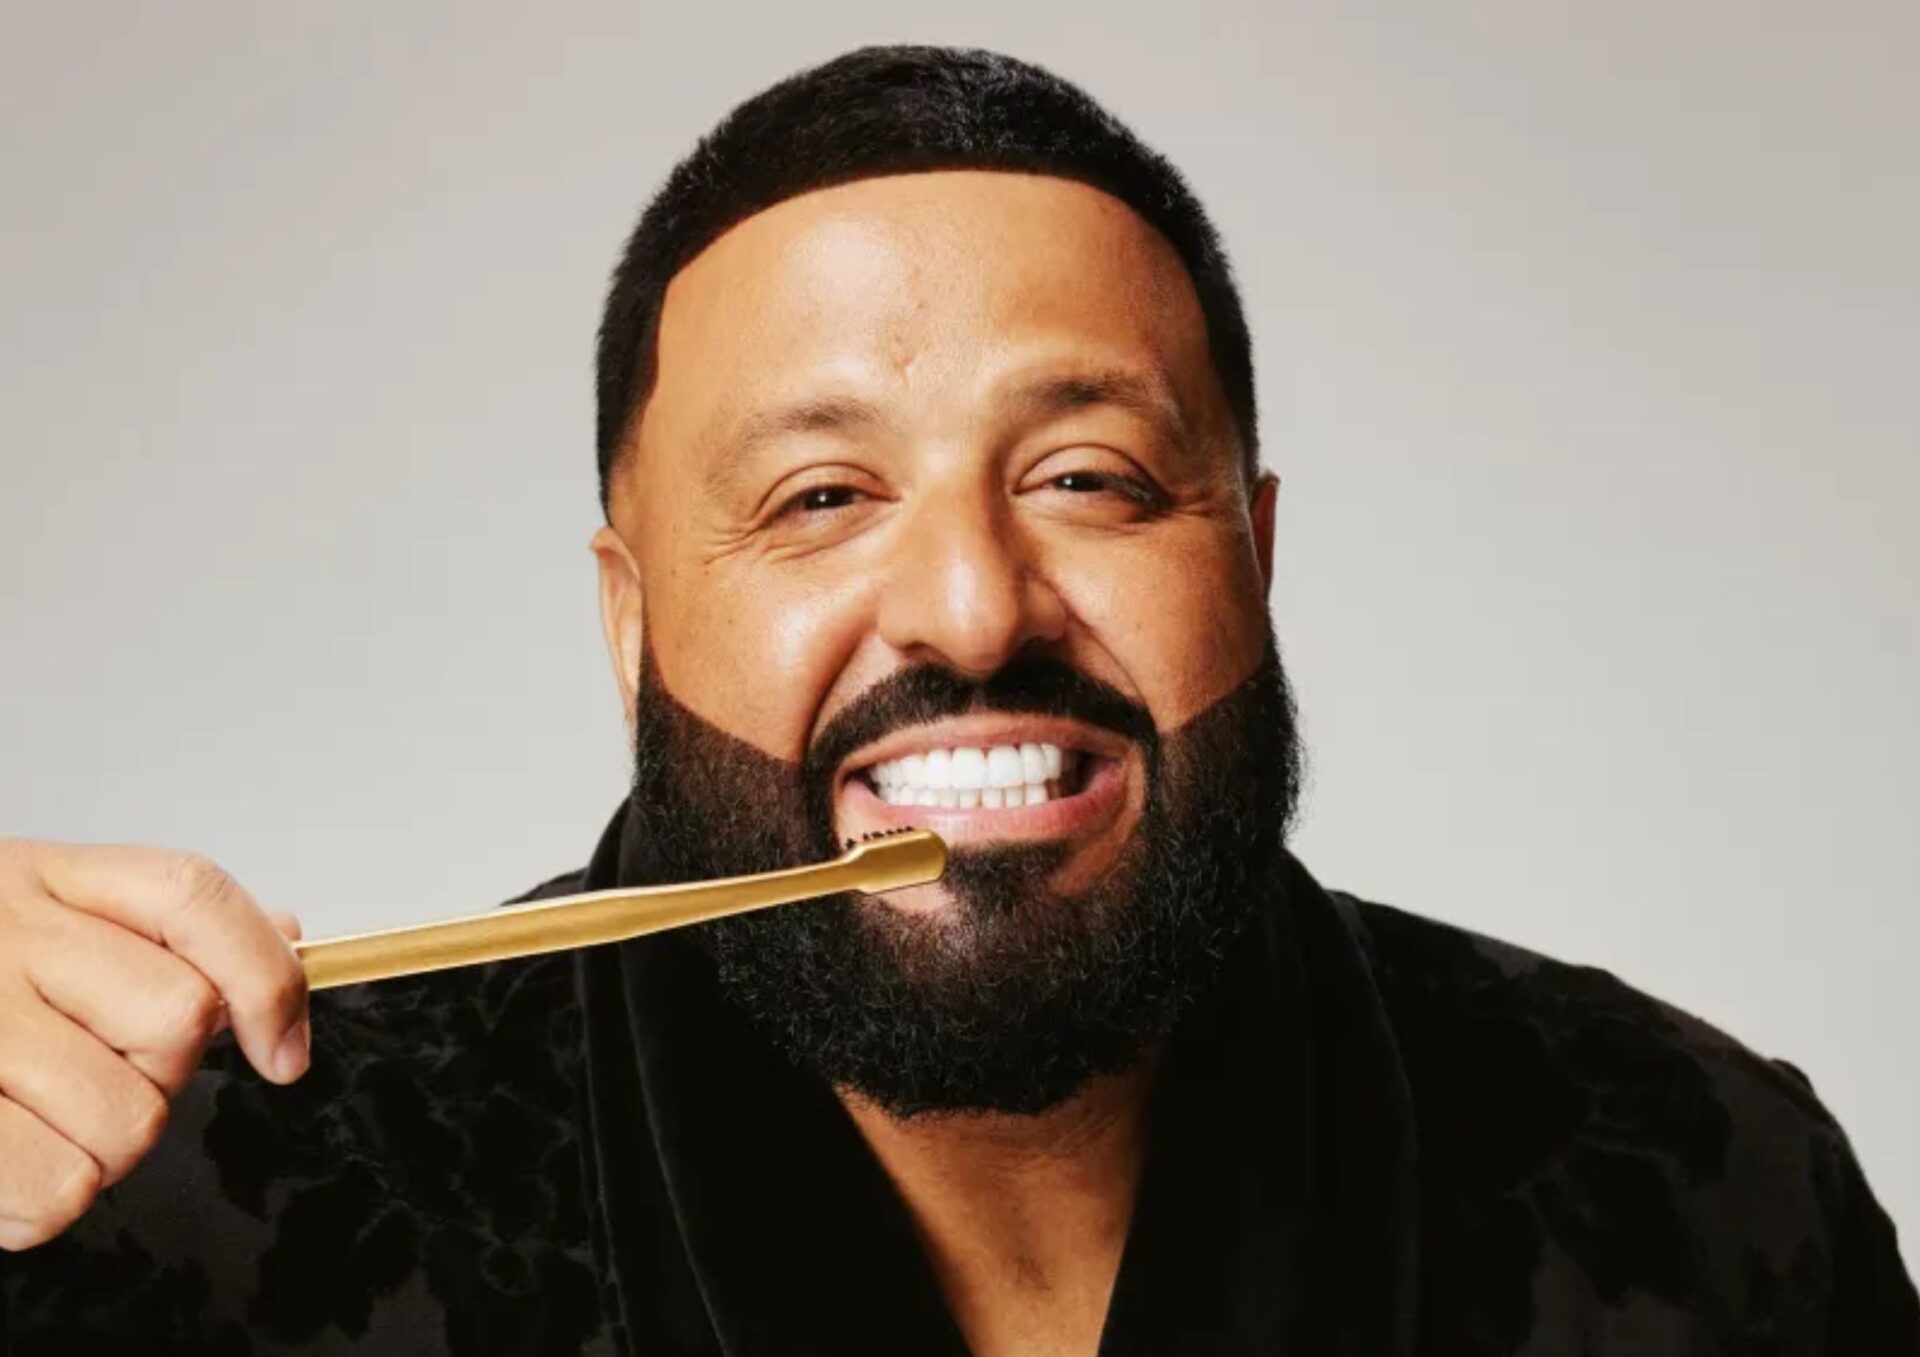 DJ Khaled's Gold Plated Toothbrush